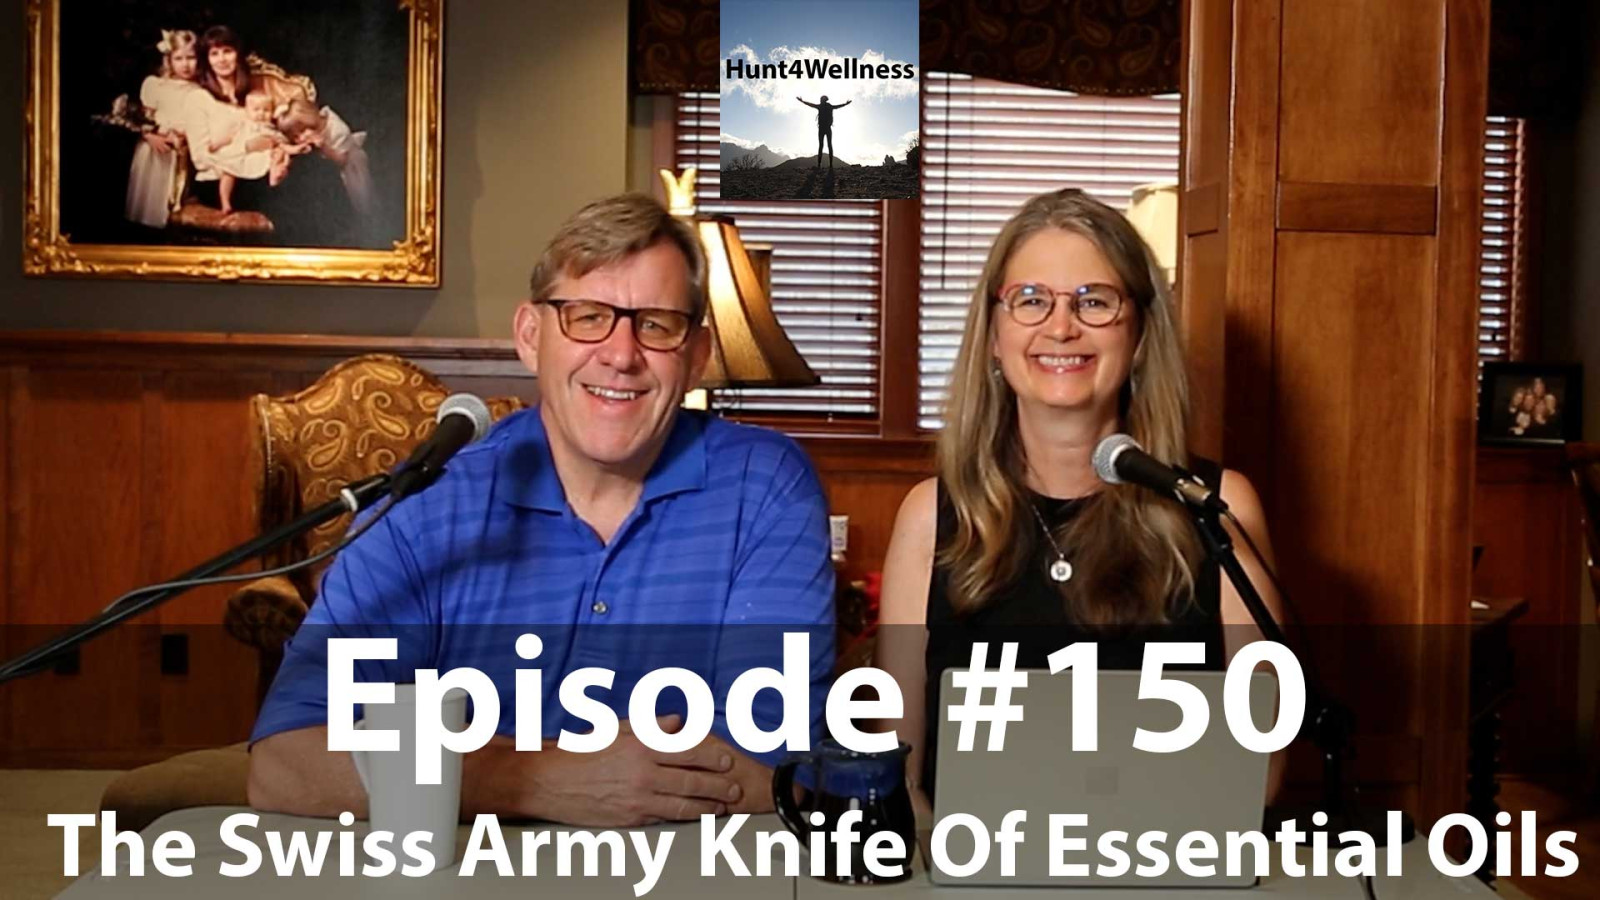 Episode #150 - The Swiss Army Knife Of Essential Oils